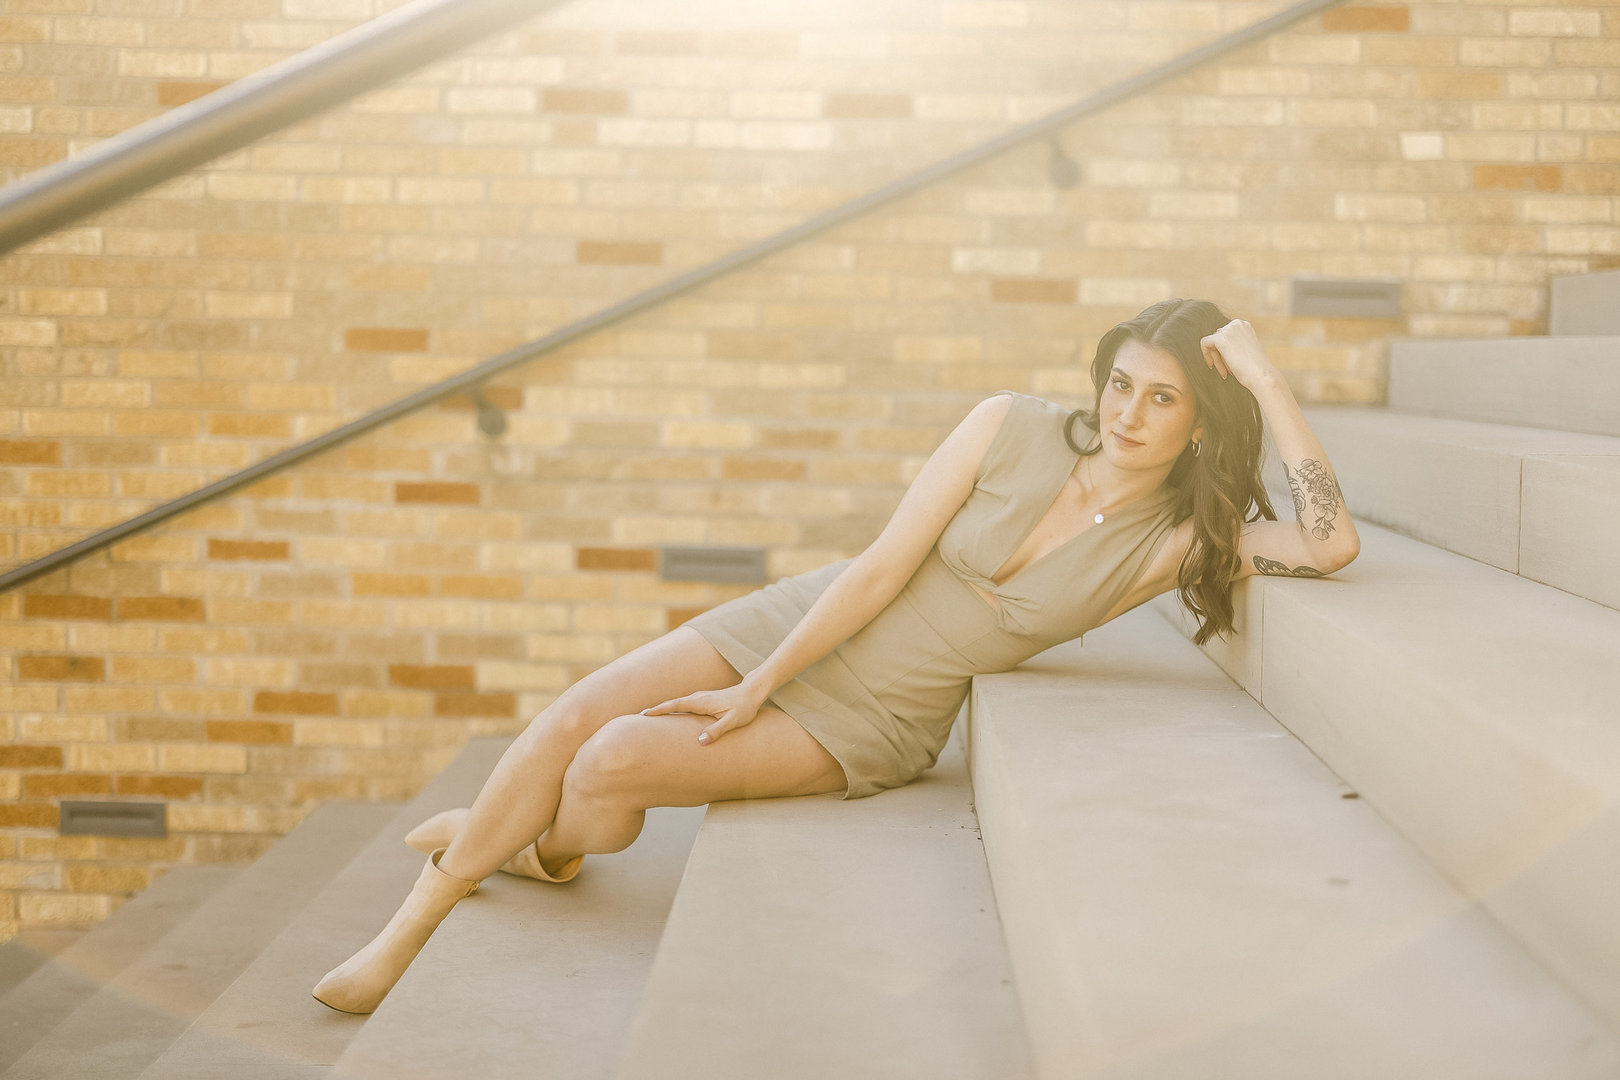 Sexy model with dark hair dresses in a short dress lying down on stair for a NW Arkansas model photographer.